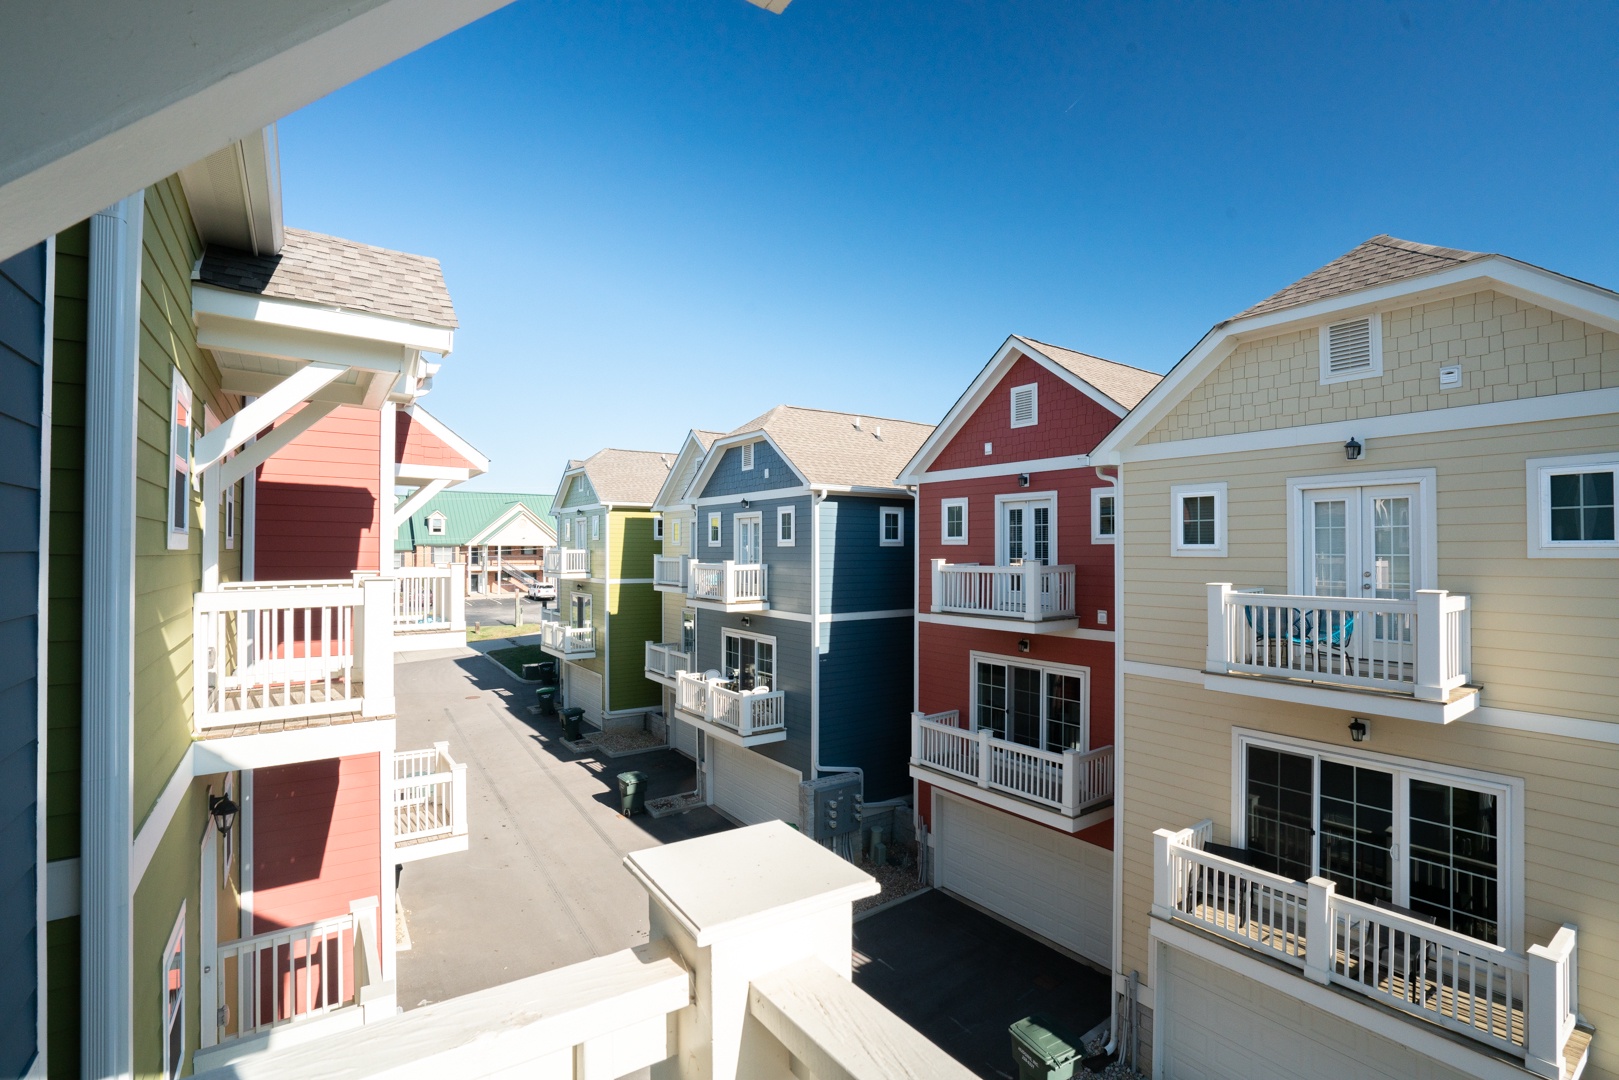 Take in the gorgeous views from the 3rd floor balcony